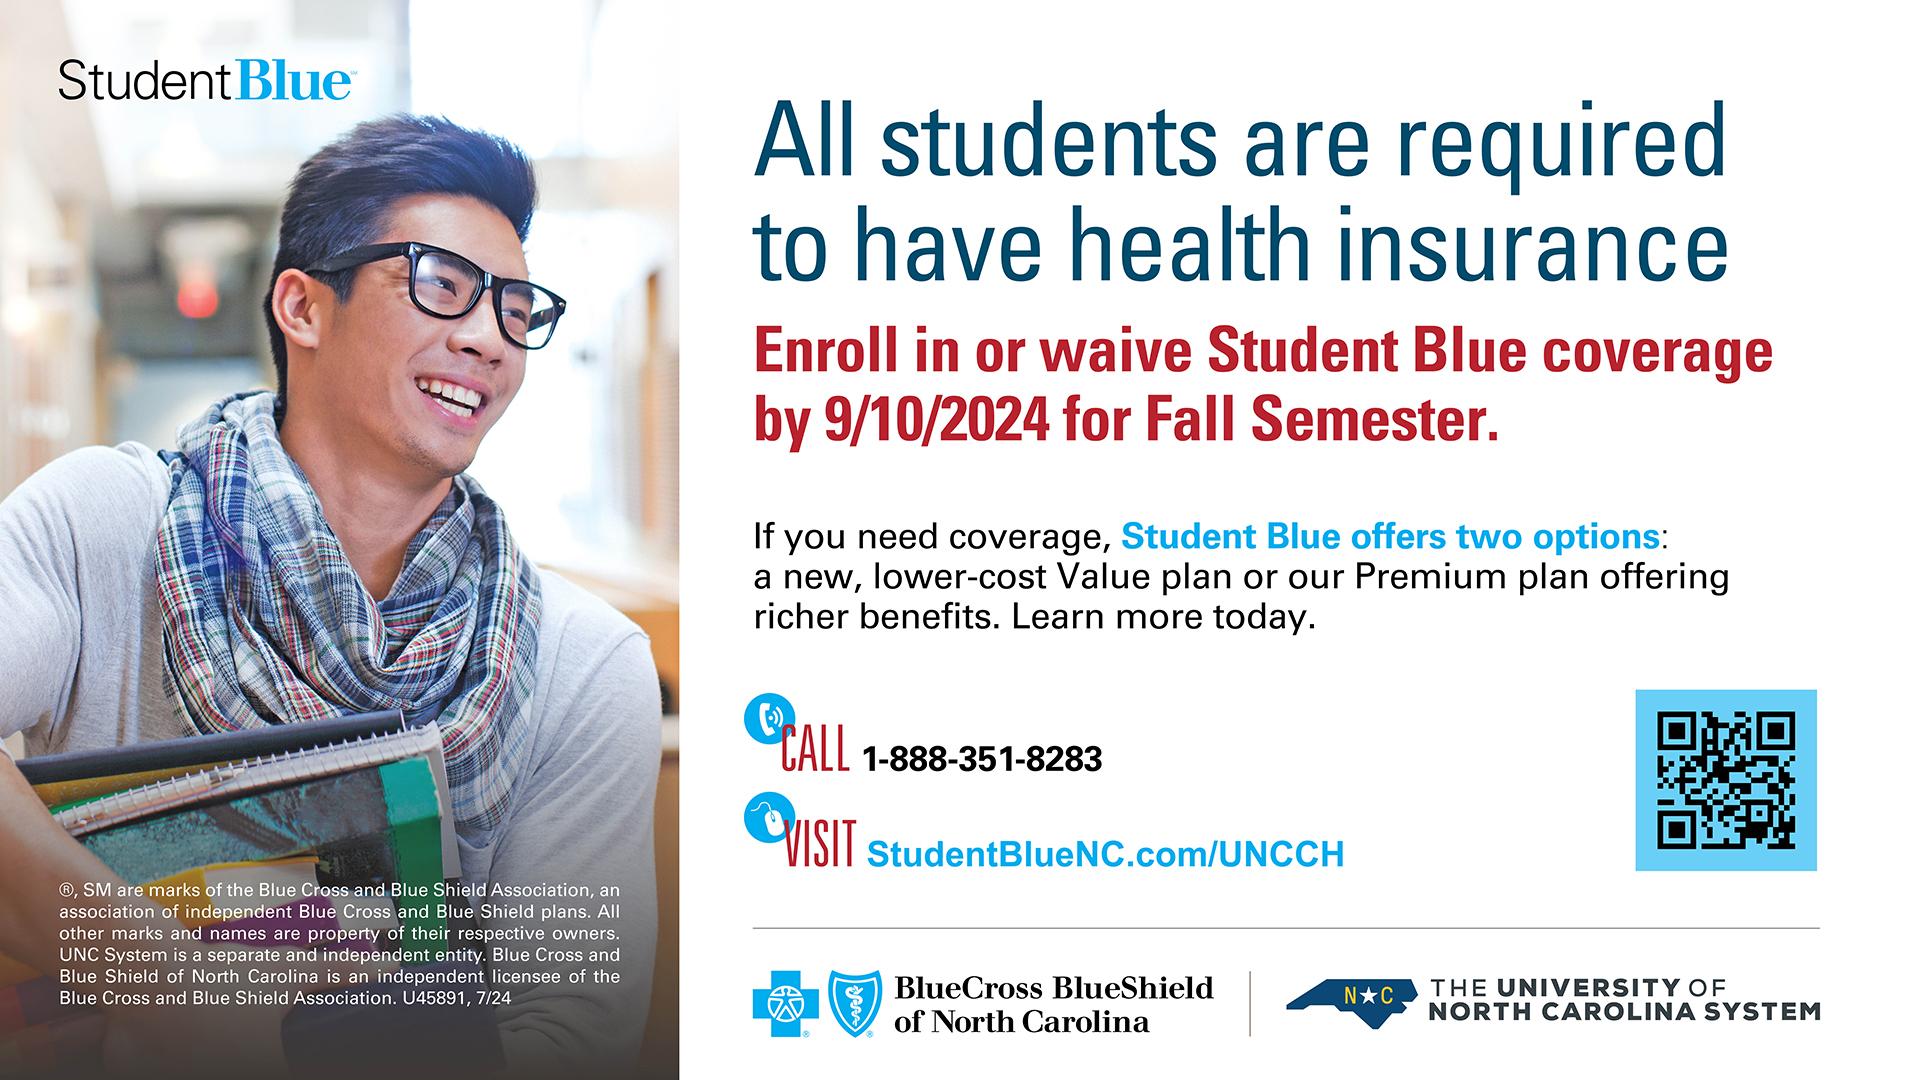 All students are required to have health insurance